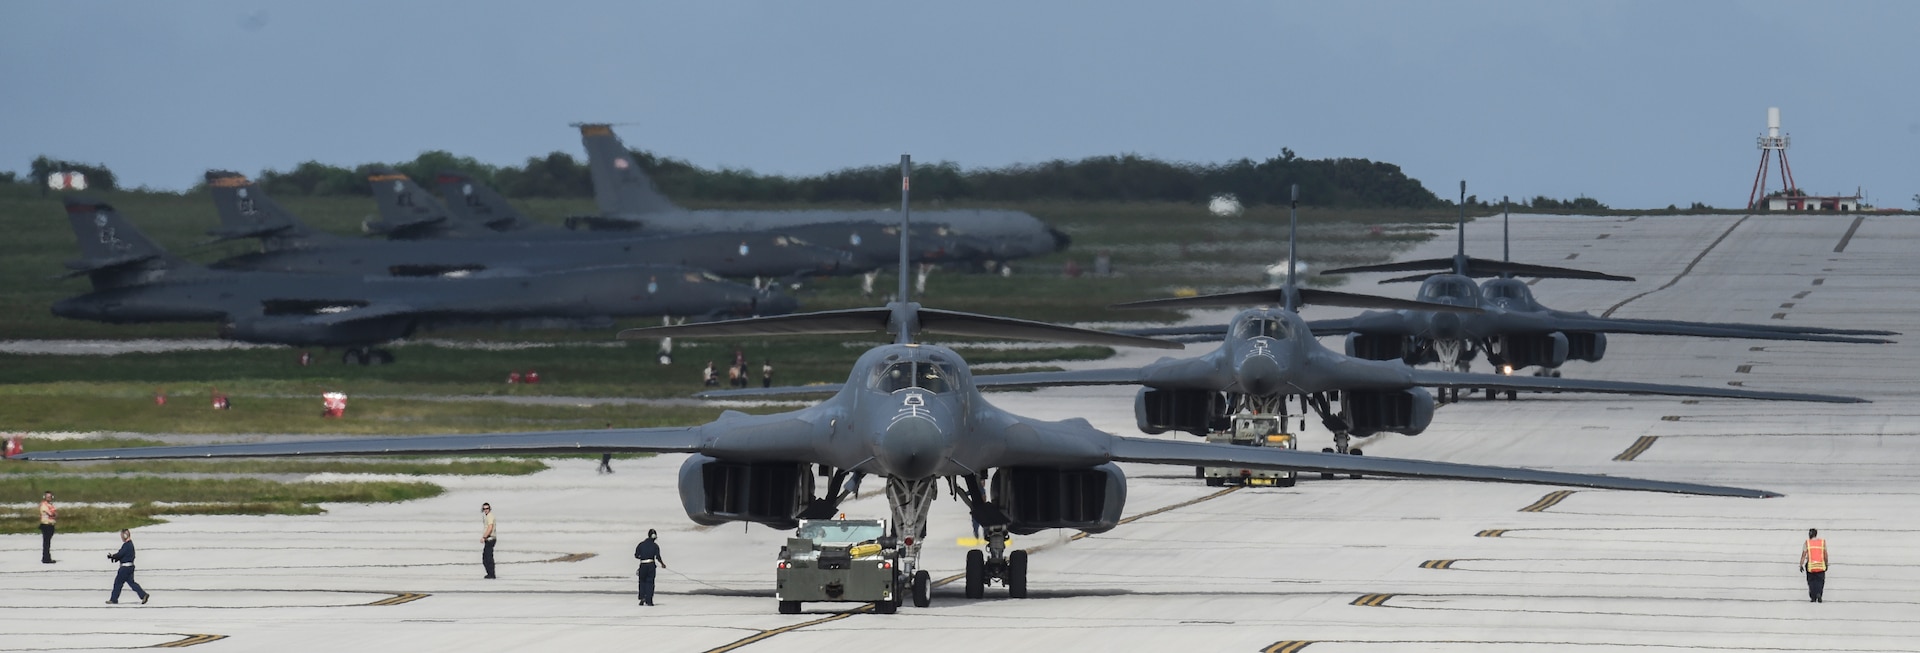 A U.S. Air Force B-1B Lancer assigned to the 9th Expeditionary Bomb Squadron, deployed from Dyess Air Force Base, Texas, arrives Feb. 6, 2017, at Andersen AFB, Guam. The 9th EBS is taking over U.S. Pacific Command’s Continuous Bomber Presence operations from the 34th EBS, assigned to Ellsworth Air Force Base, S.D. This marks the second deployment of B-1s to Guam in over a decade. The first deployment of B-1s arrived in August 2016 and took over CBP operations from the B-52 Stratofortress bomber squadrons from Minot AFB, N.D., and Barksdale AFB, La. 